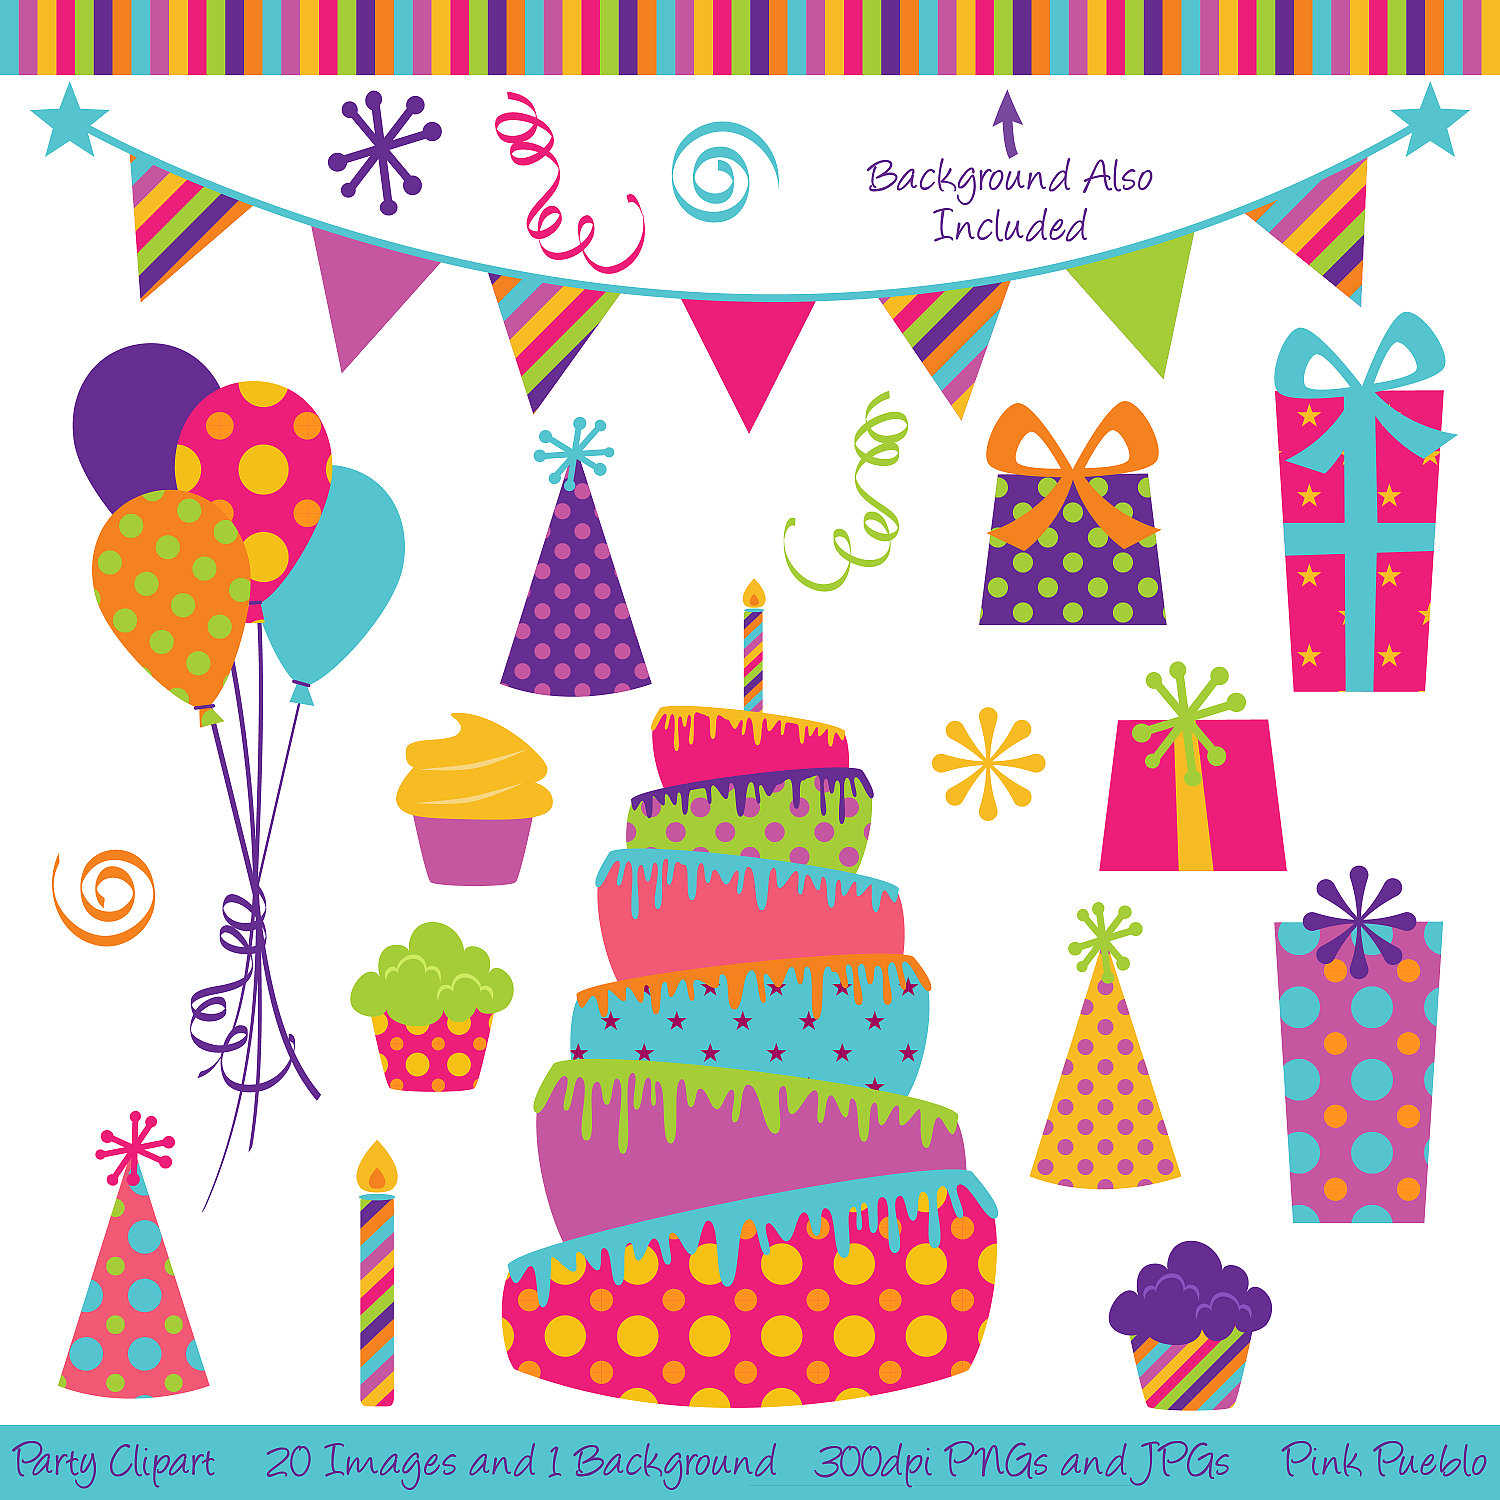 Free supplies cliparts download. Decoration clipart party theme